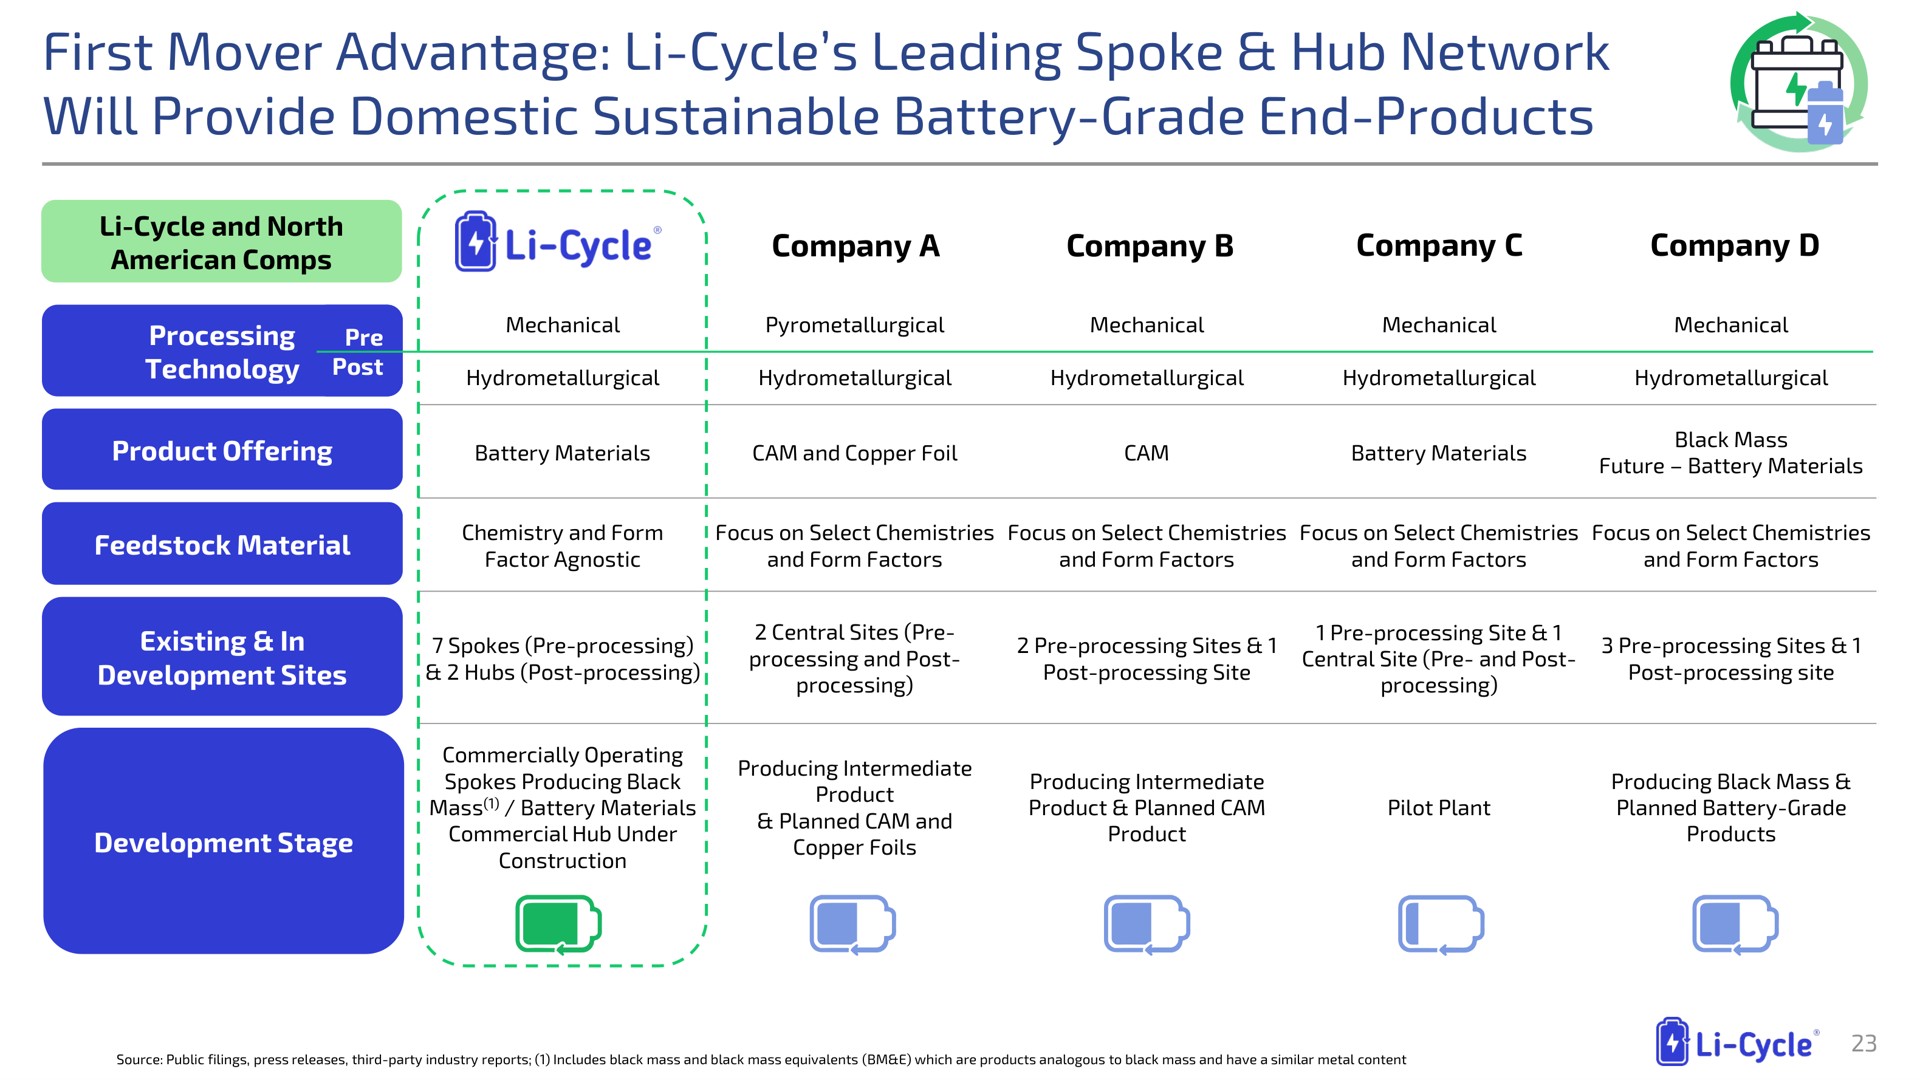 first mover advantage cycle leading spoke hub network will provide domestic sustainable battery grade end products | Li-Cycle